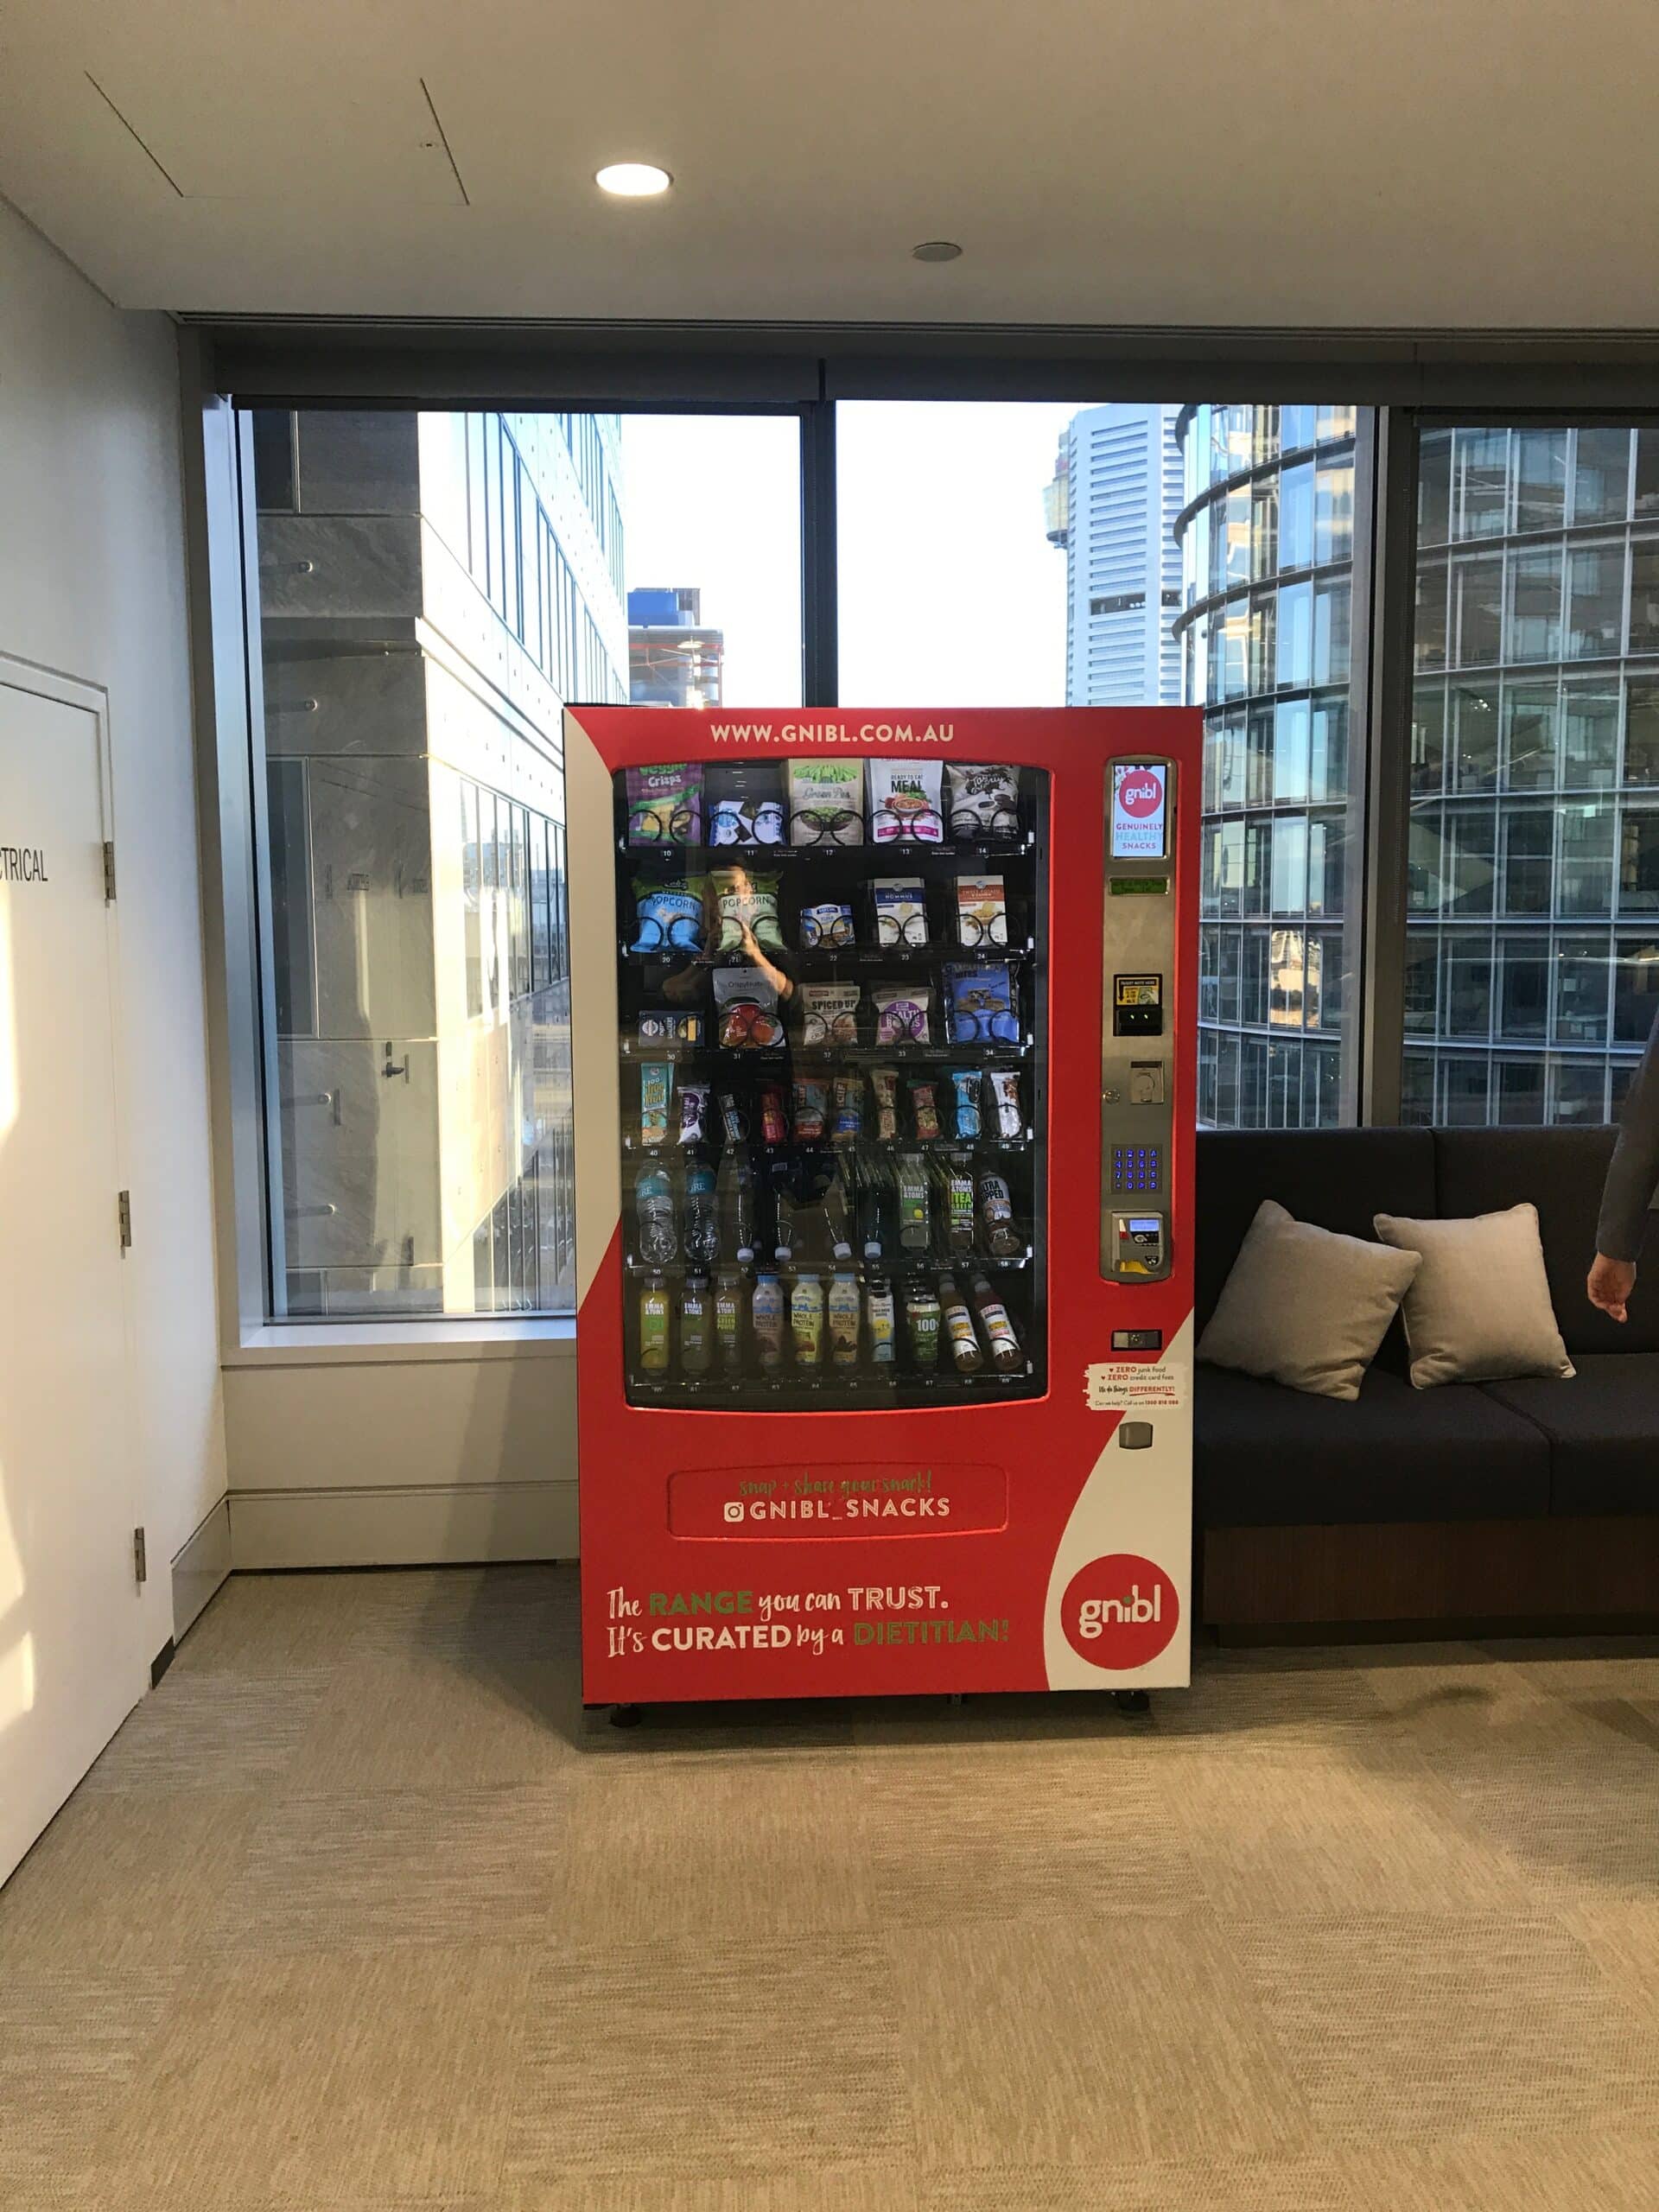 Fully stocked Gnibl vending machine in an office setting in Sydney.